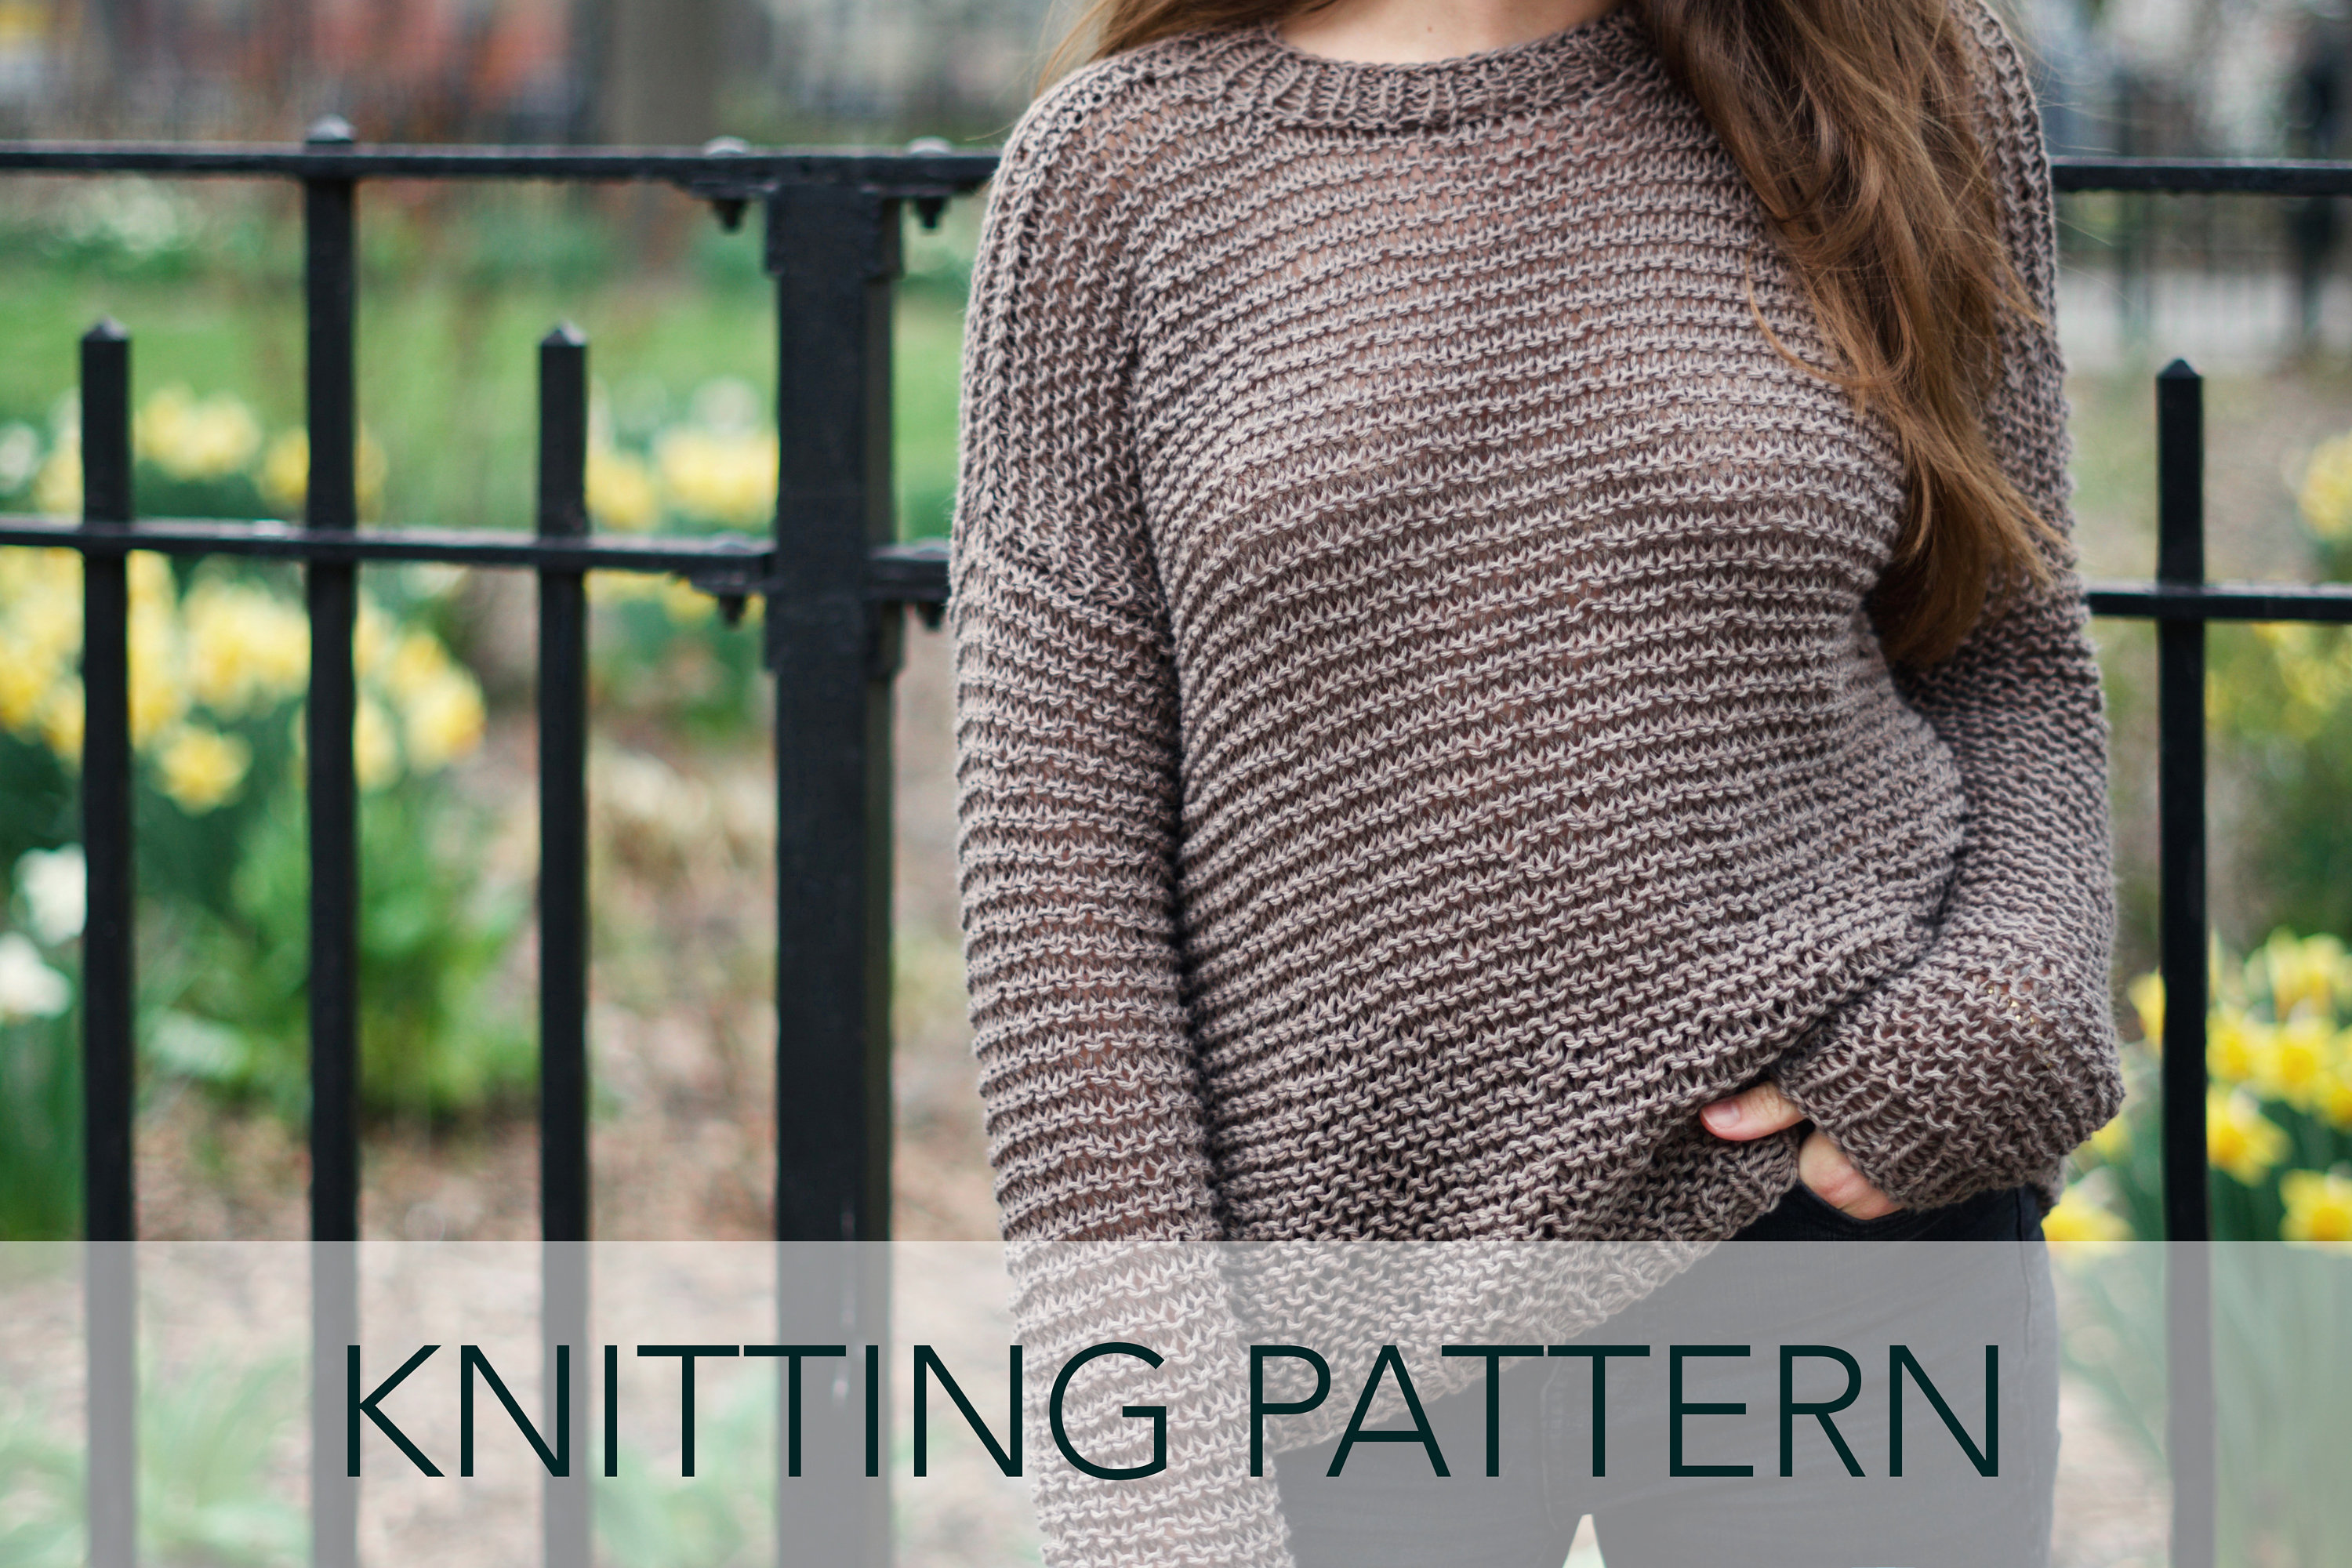 How to knit a sweater: Slouchy style sweater pattern for all